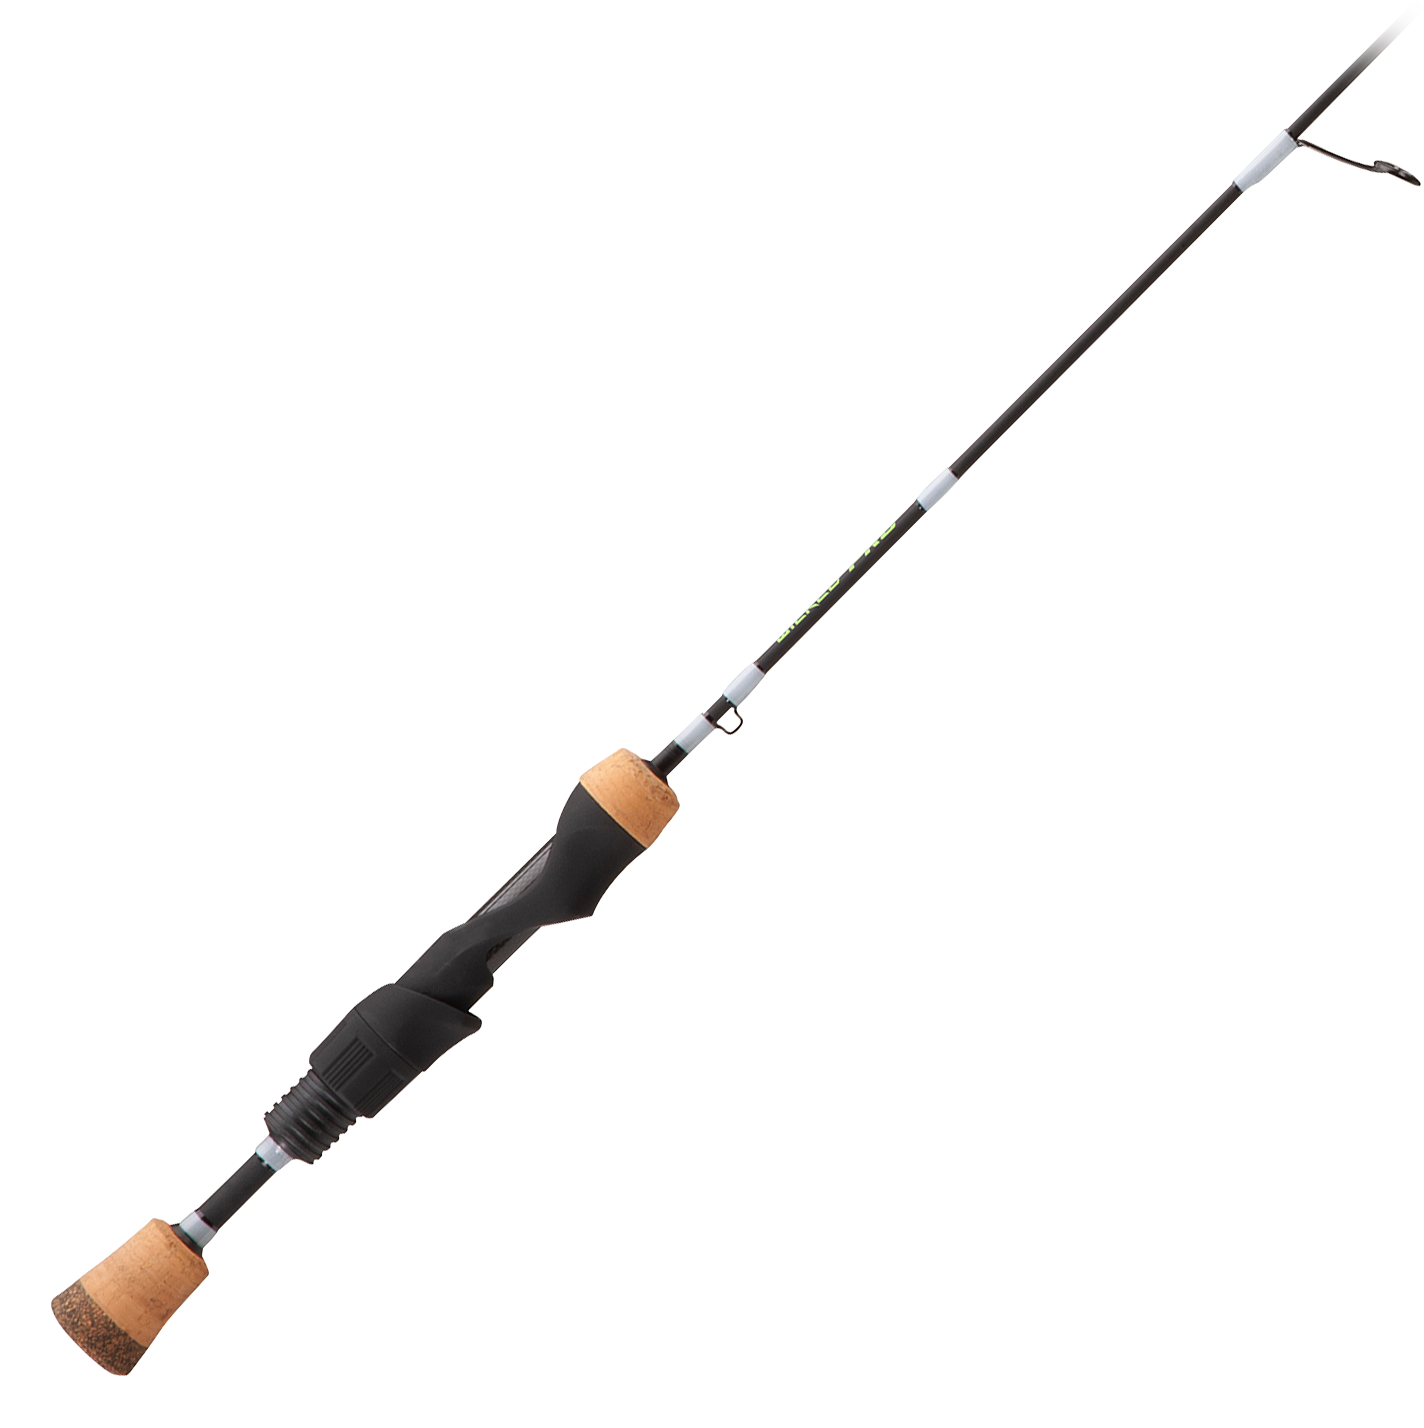  13 FISHING - Wicked Pro Ice Rod - 36 MH (Medium Heavy) -  Composite Blank - Split Grip Handle with Evolve Reel Seat - PS-36MH :  Sports & Outdoors